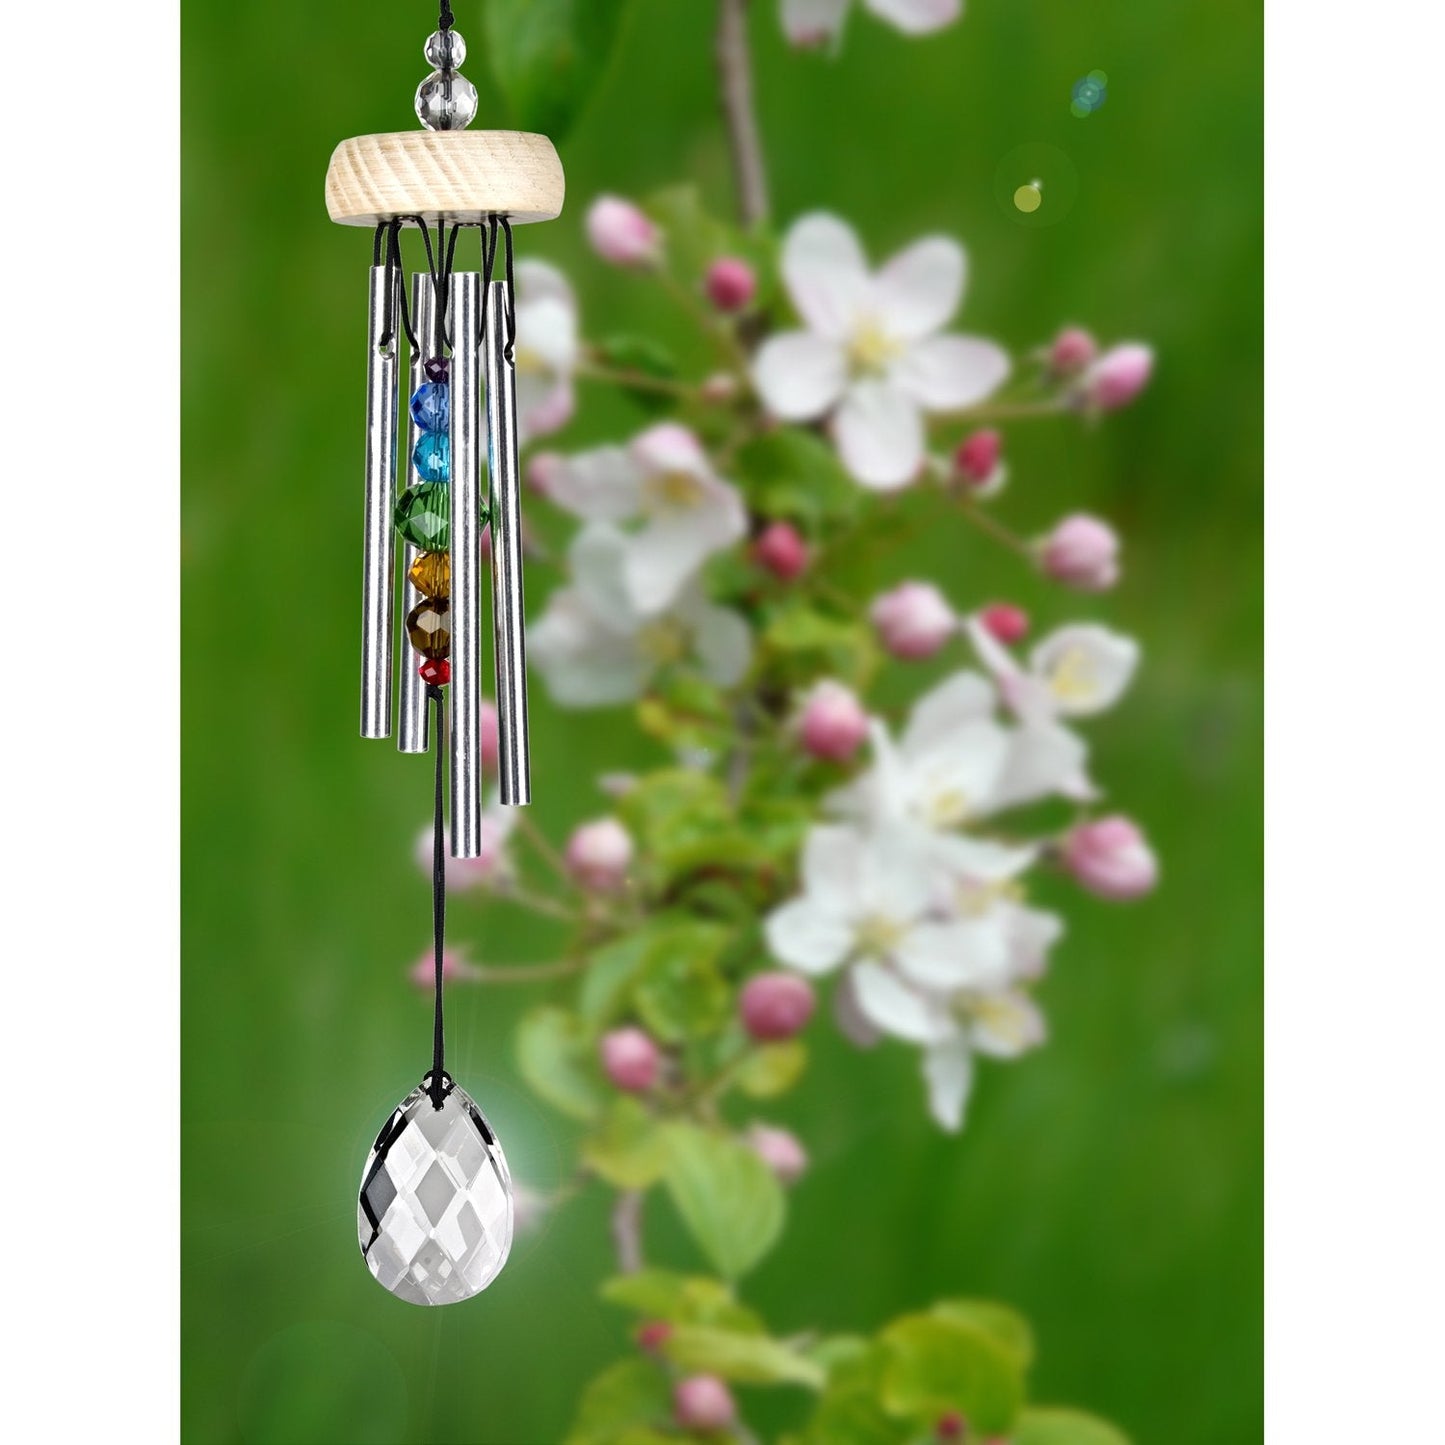 Gem Drop Chime - Prism - by Woodstock Chimes